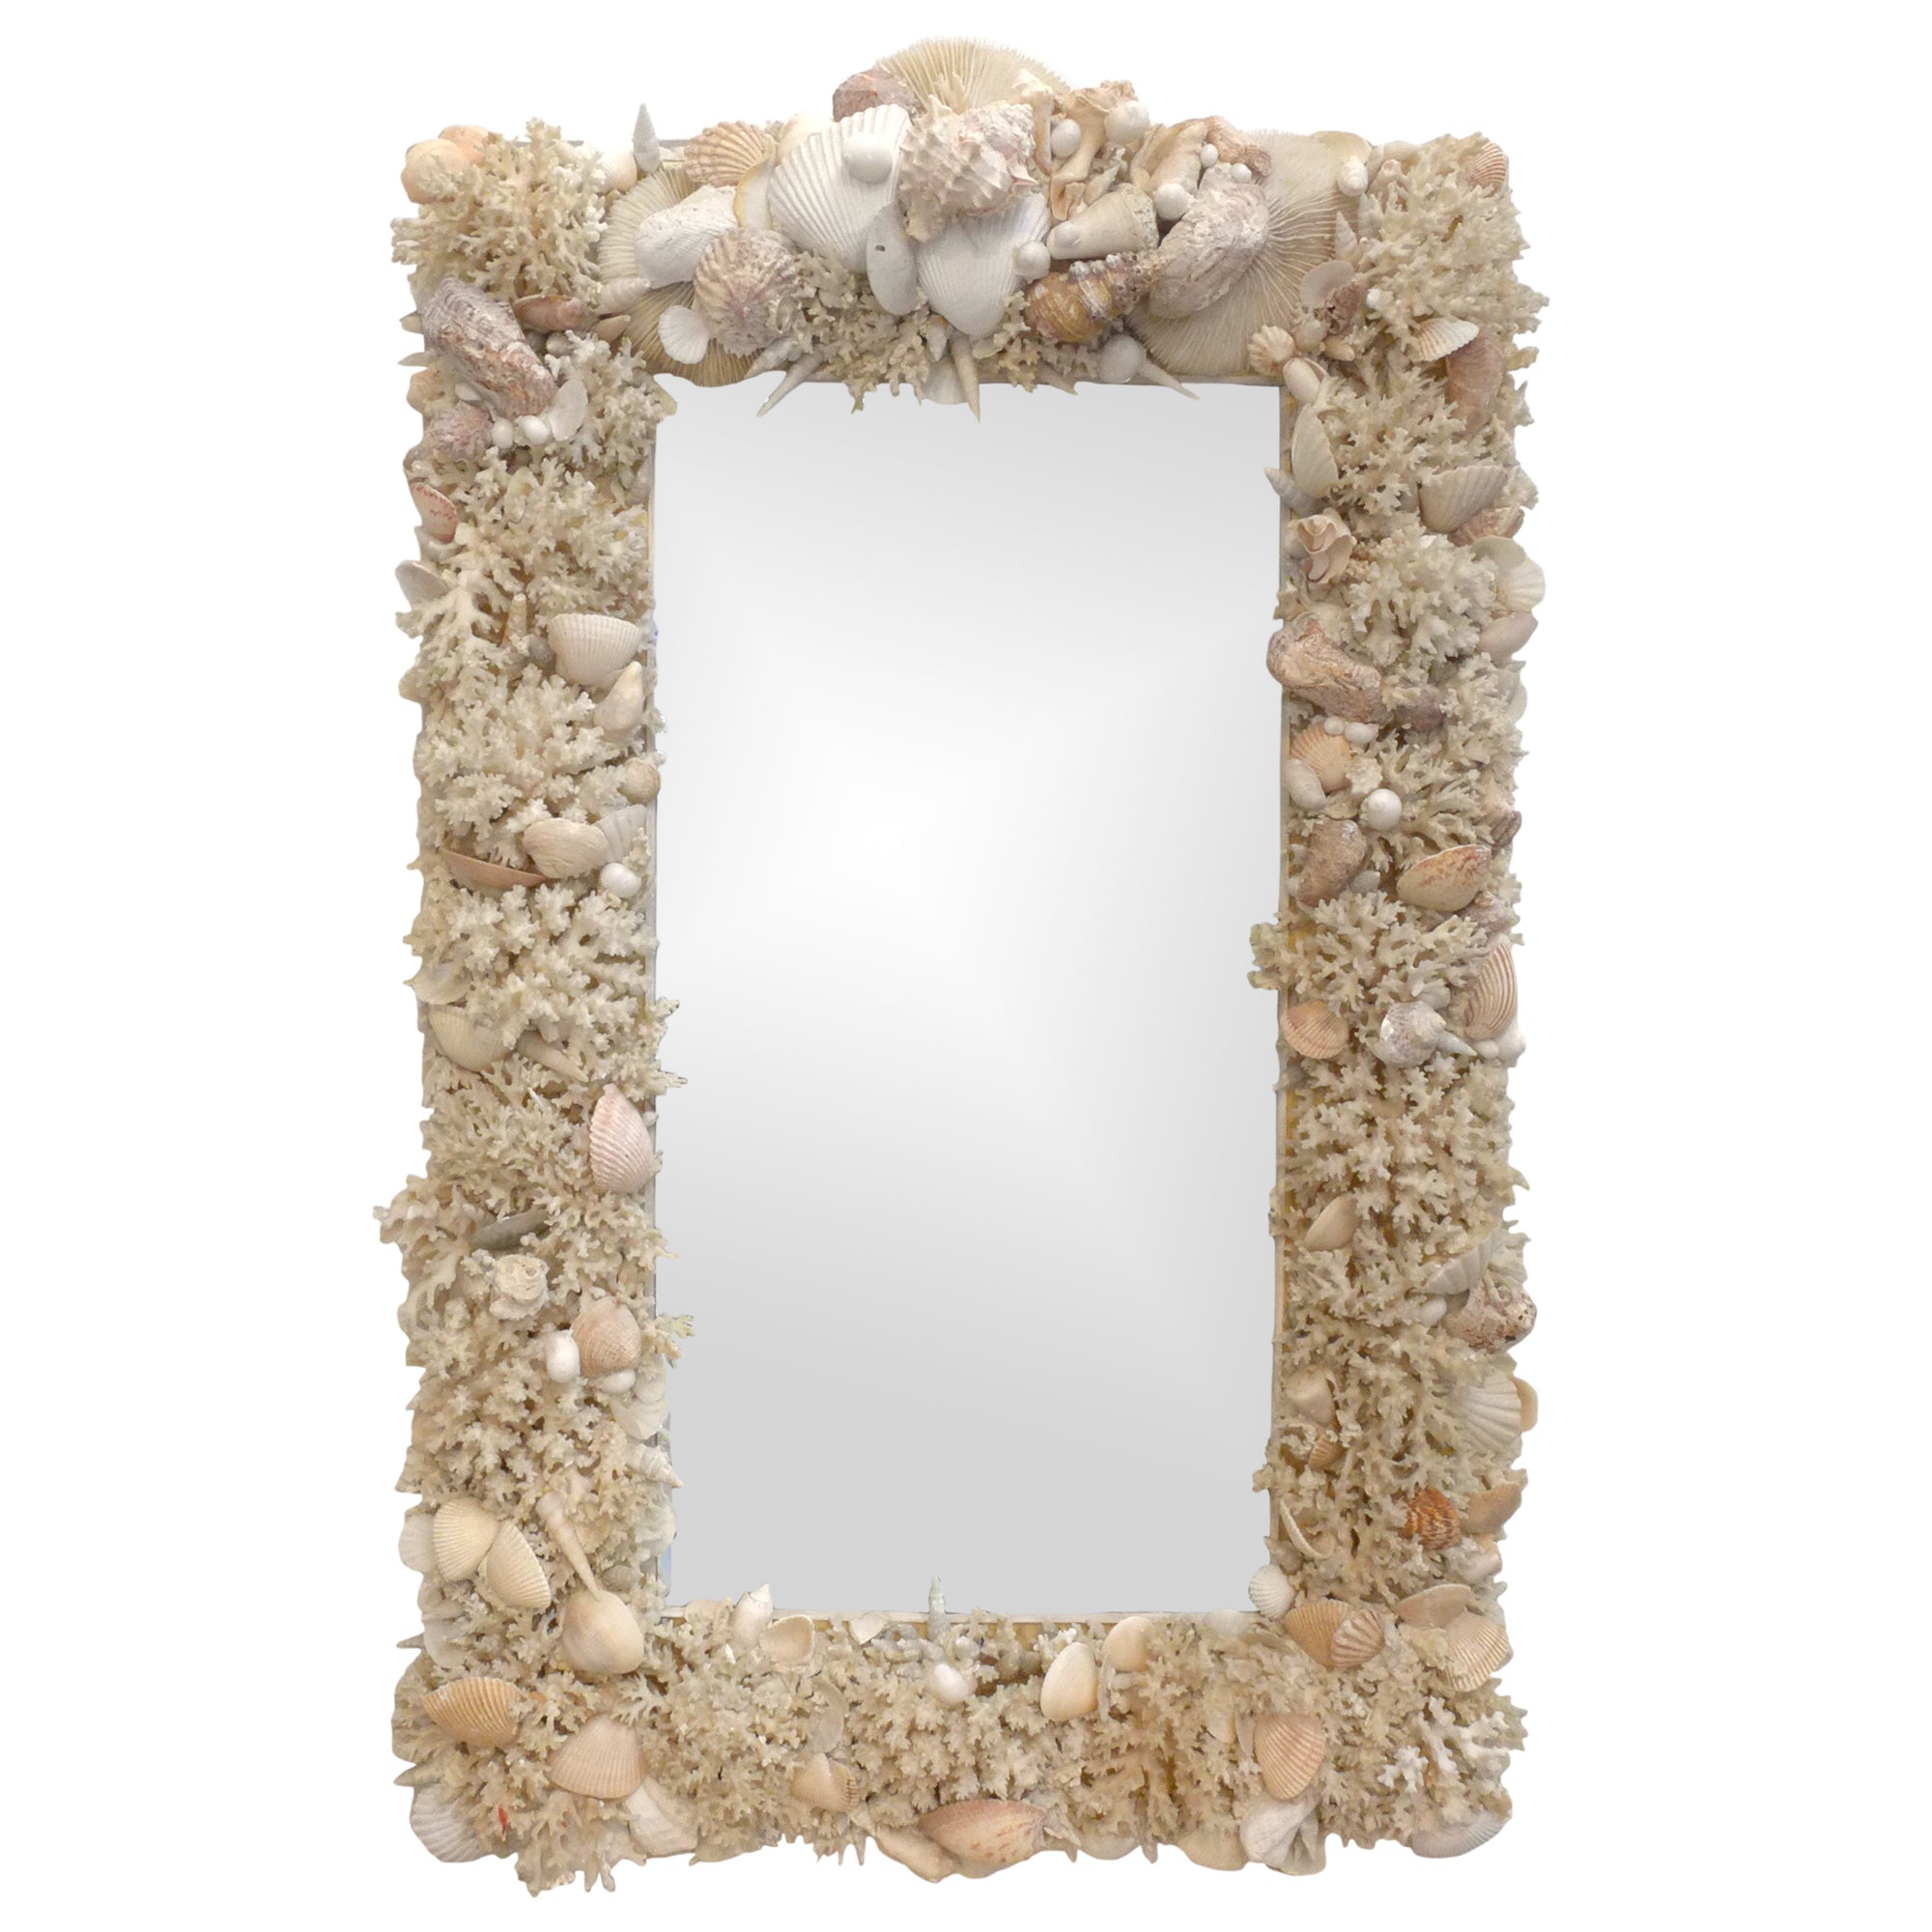 Coral and Seashells Framed Mirror